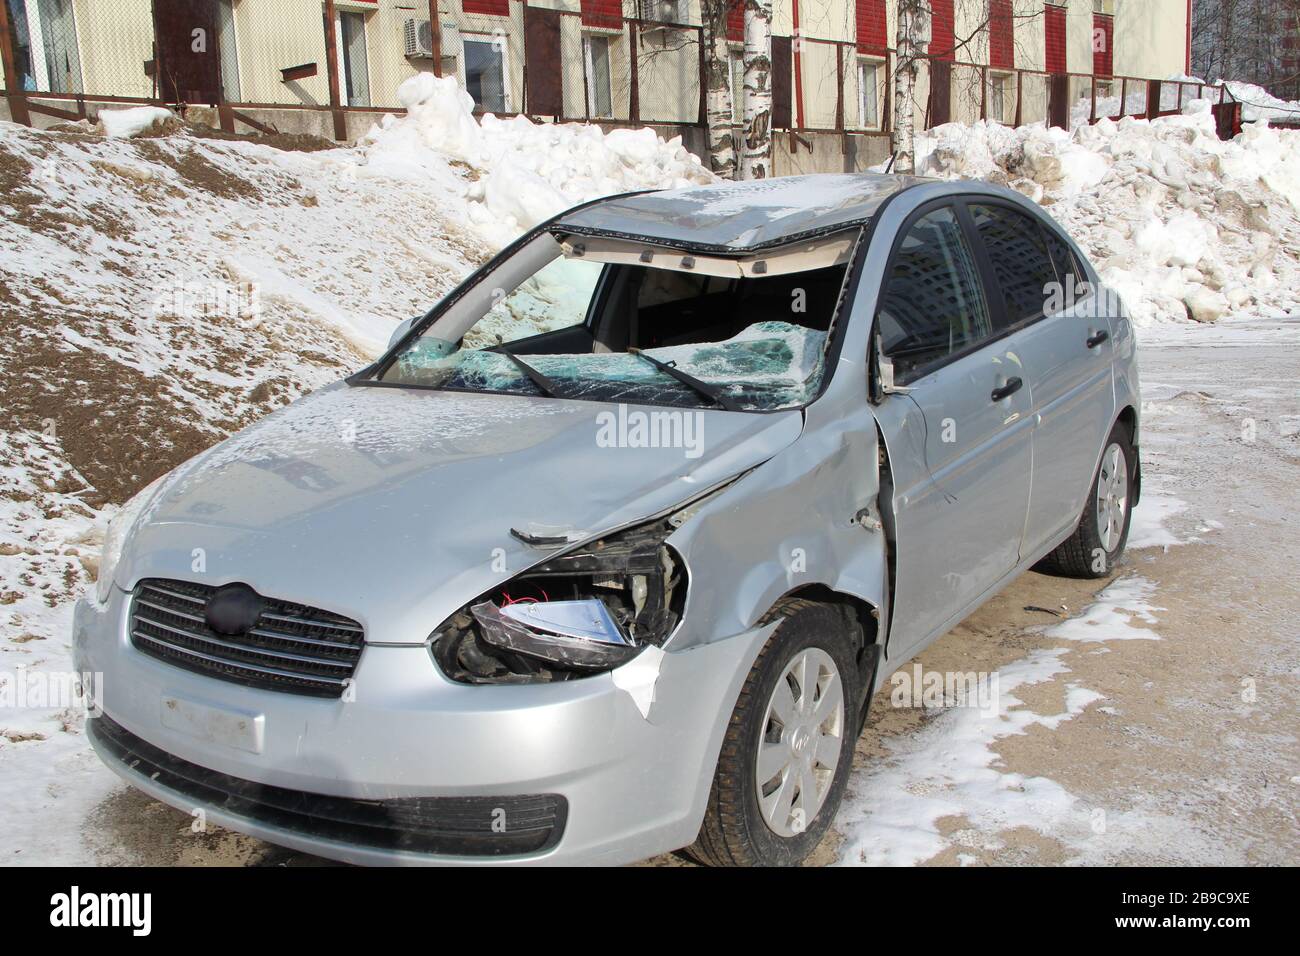 A broken silver car after an accident on the road. Transport security concept. Stock Photo